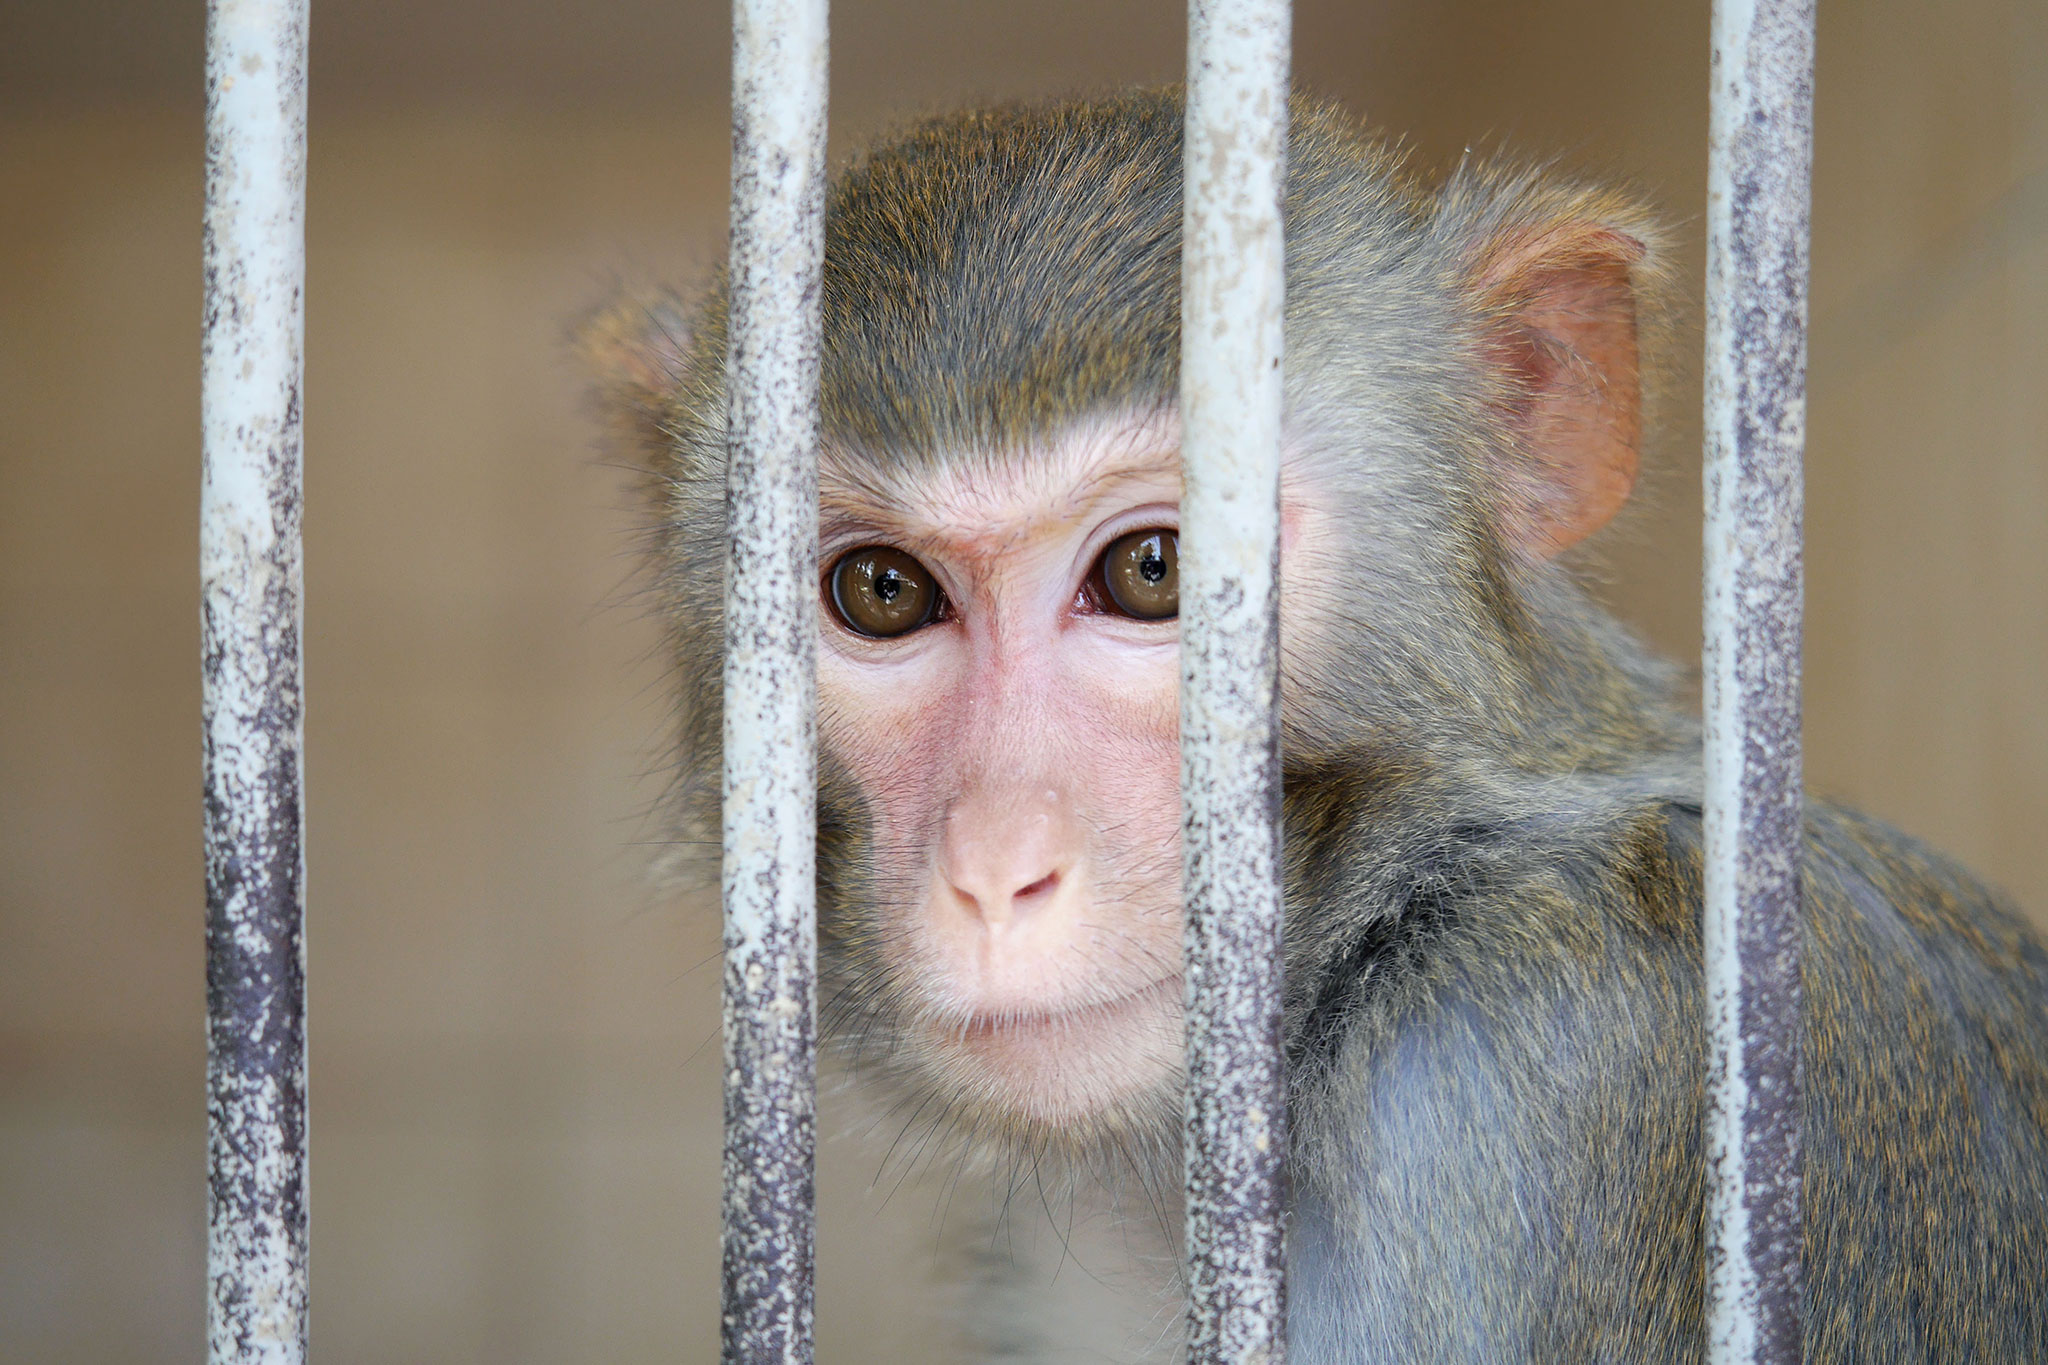 VW Monkey Testing Reflects Growing Unpopularity With Animal Experiments